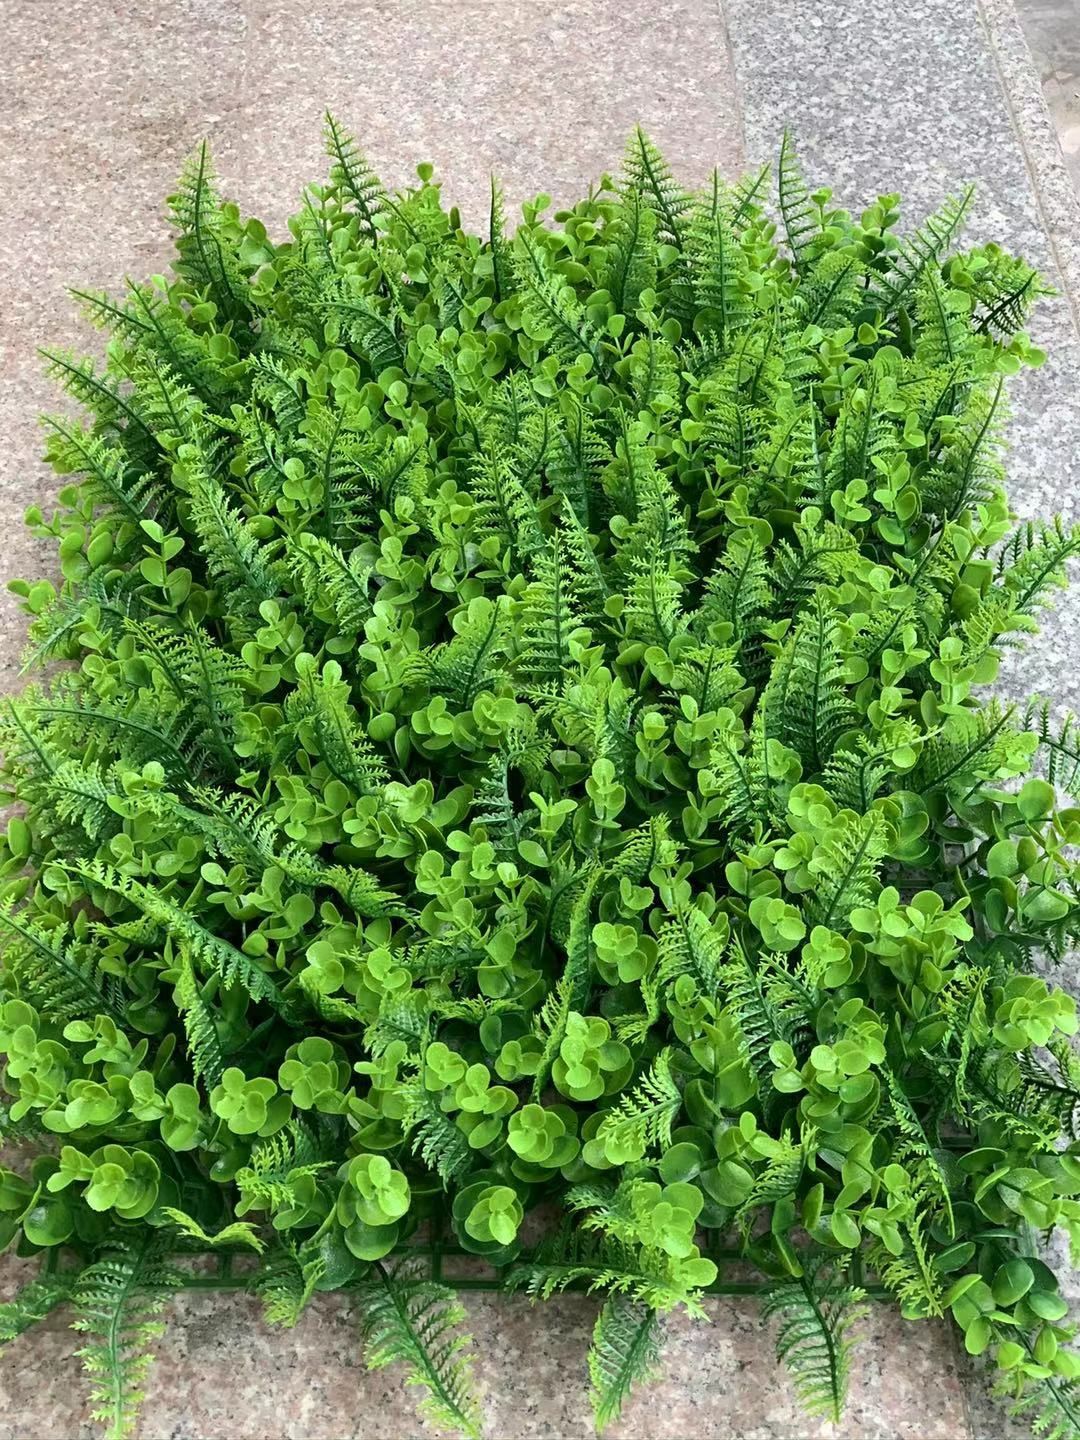 Simulated turf artificial lawn plant wall decoration green plant wall plastic decoration